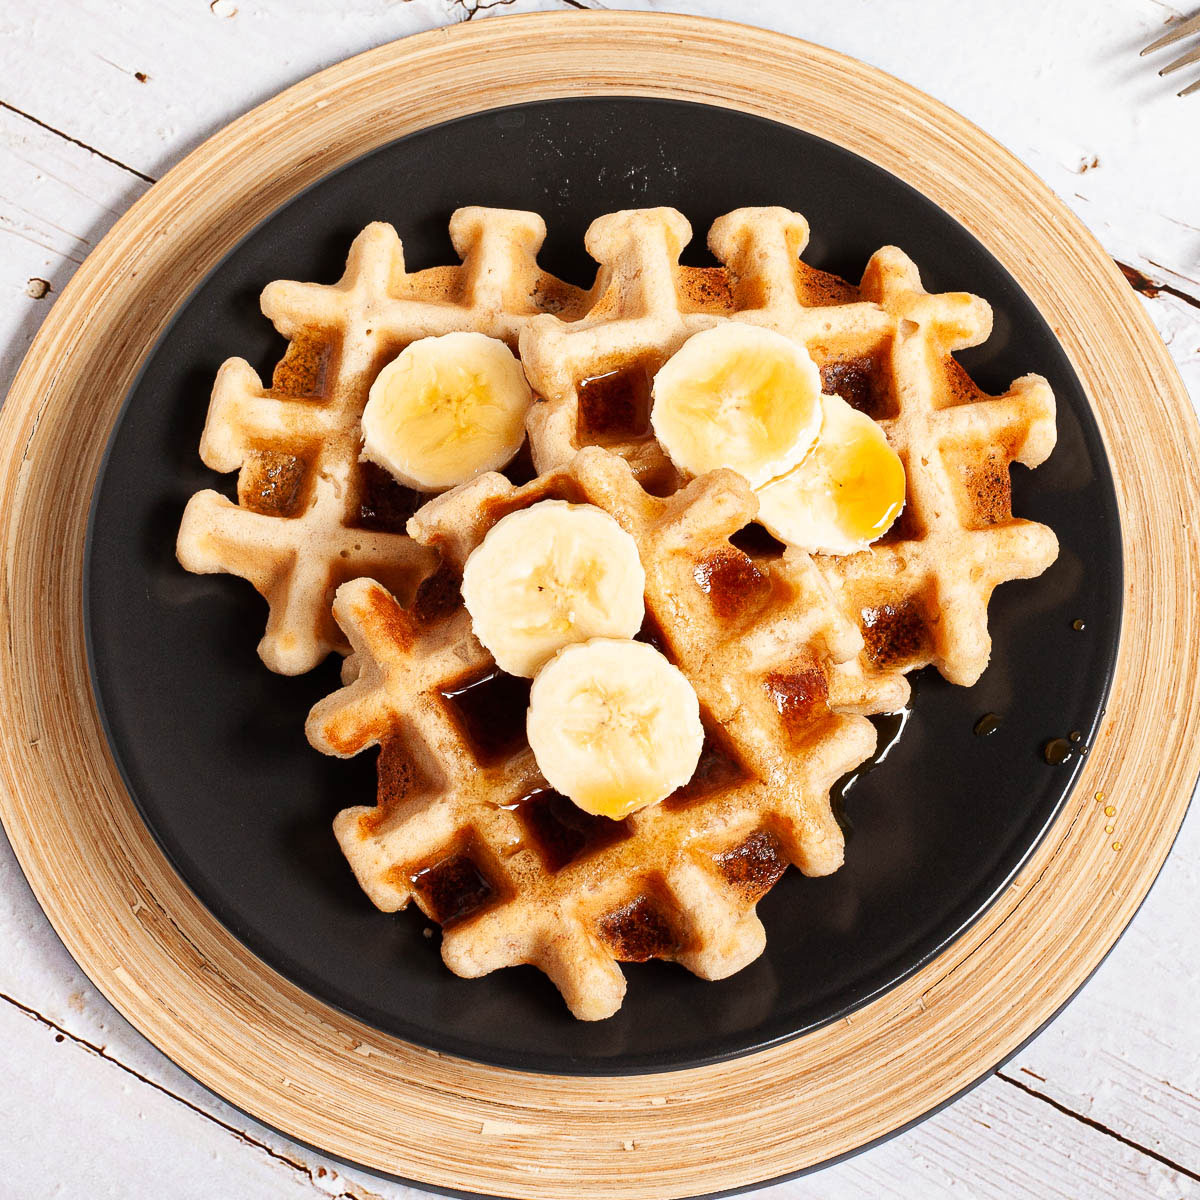 <p>At first, it may seem difficult to modify a classic waffle recipe and expect it to taste the same. However, using ripe bananas as an egg substitute can add moisture and create a delicious final product. One mashed banana can replace one egg in these <a href="https://mypureplants.com/vegan-banana-pancakes-gluten-free/">vegan pancakes</a> or in vegan waffles, resulting in a healthy breakfast.</p> <p>Get the recipe from My Pure Plants: <a href="https://mypureplants.com/vegan-banana-waffles-gluten-free/">vegan waffles</a></p>